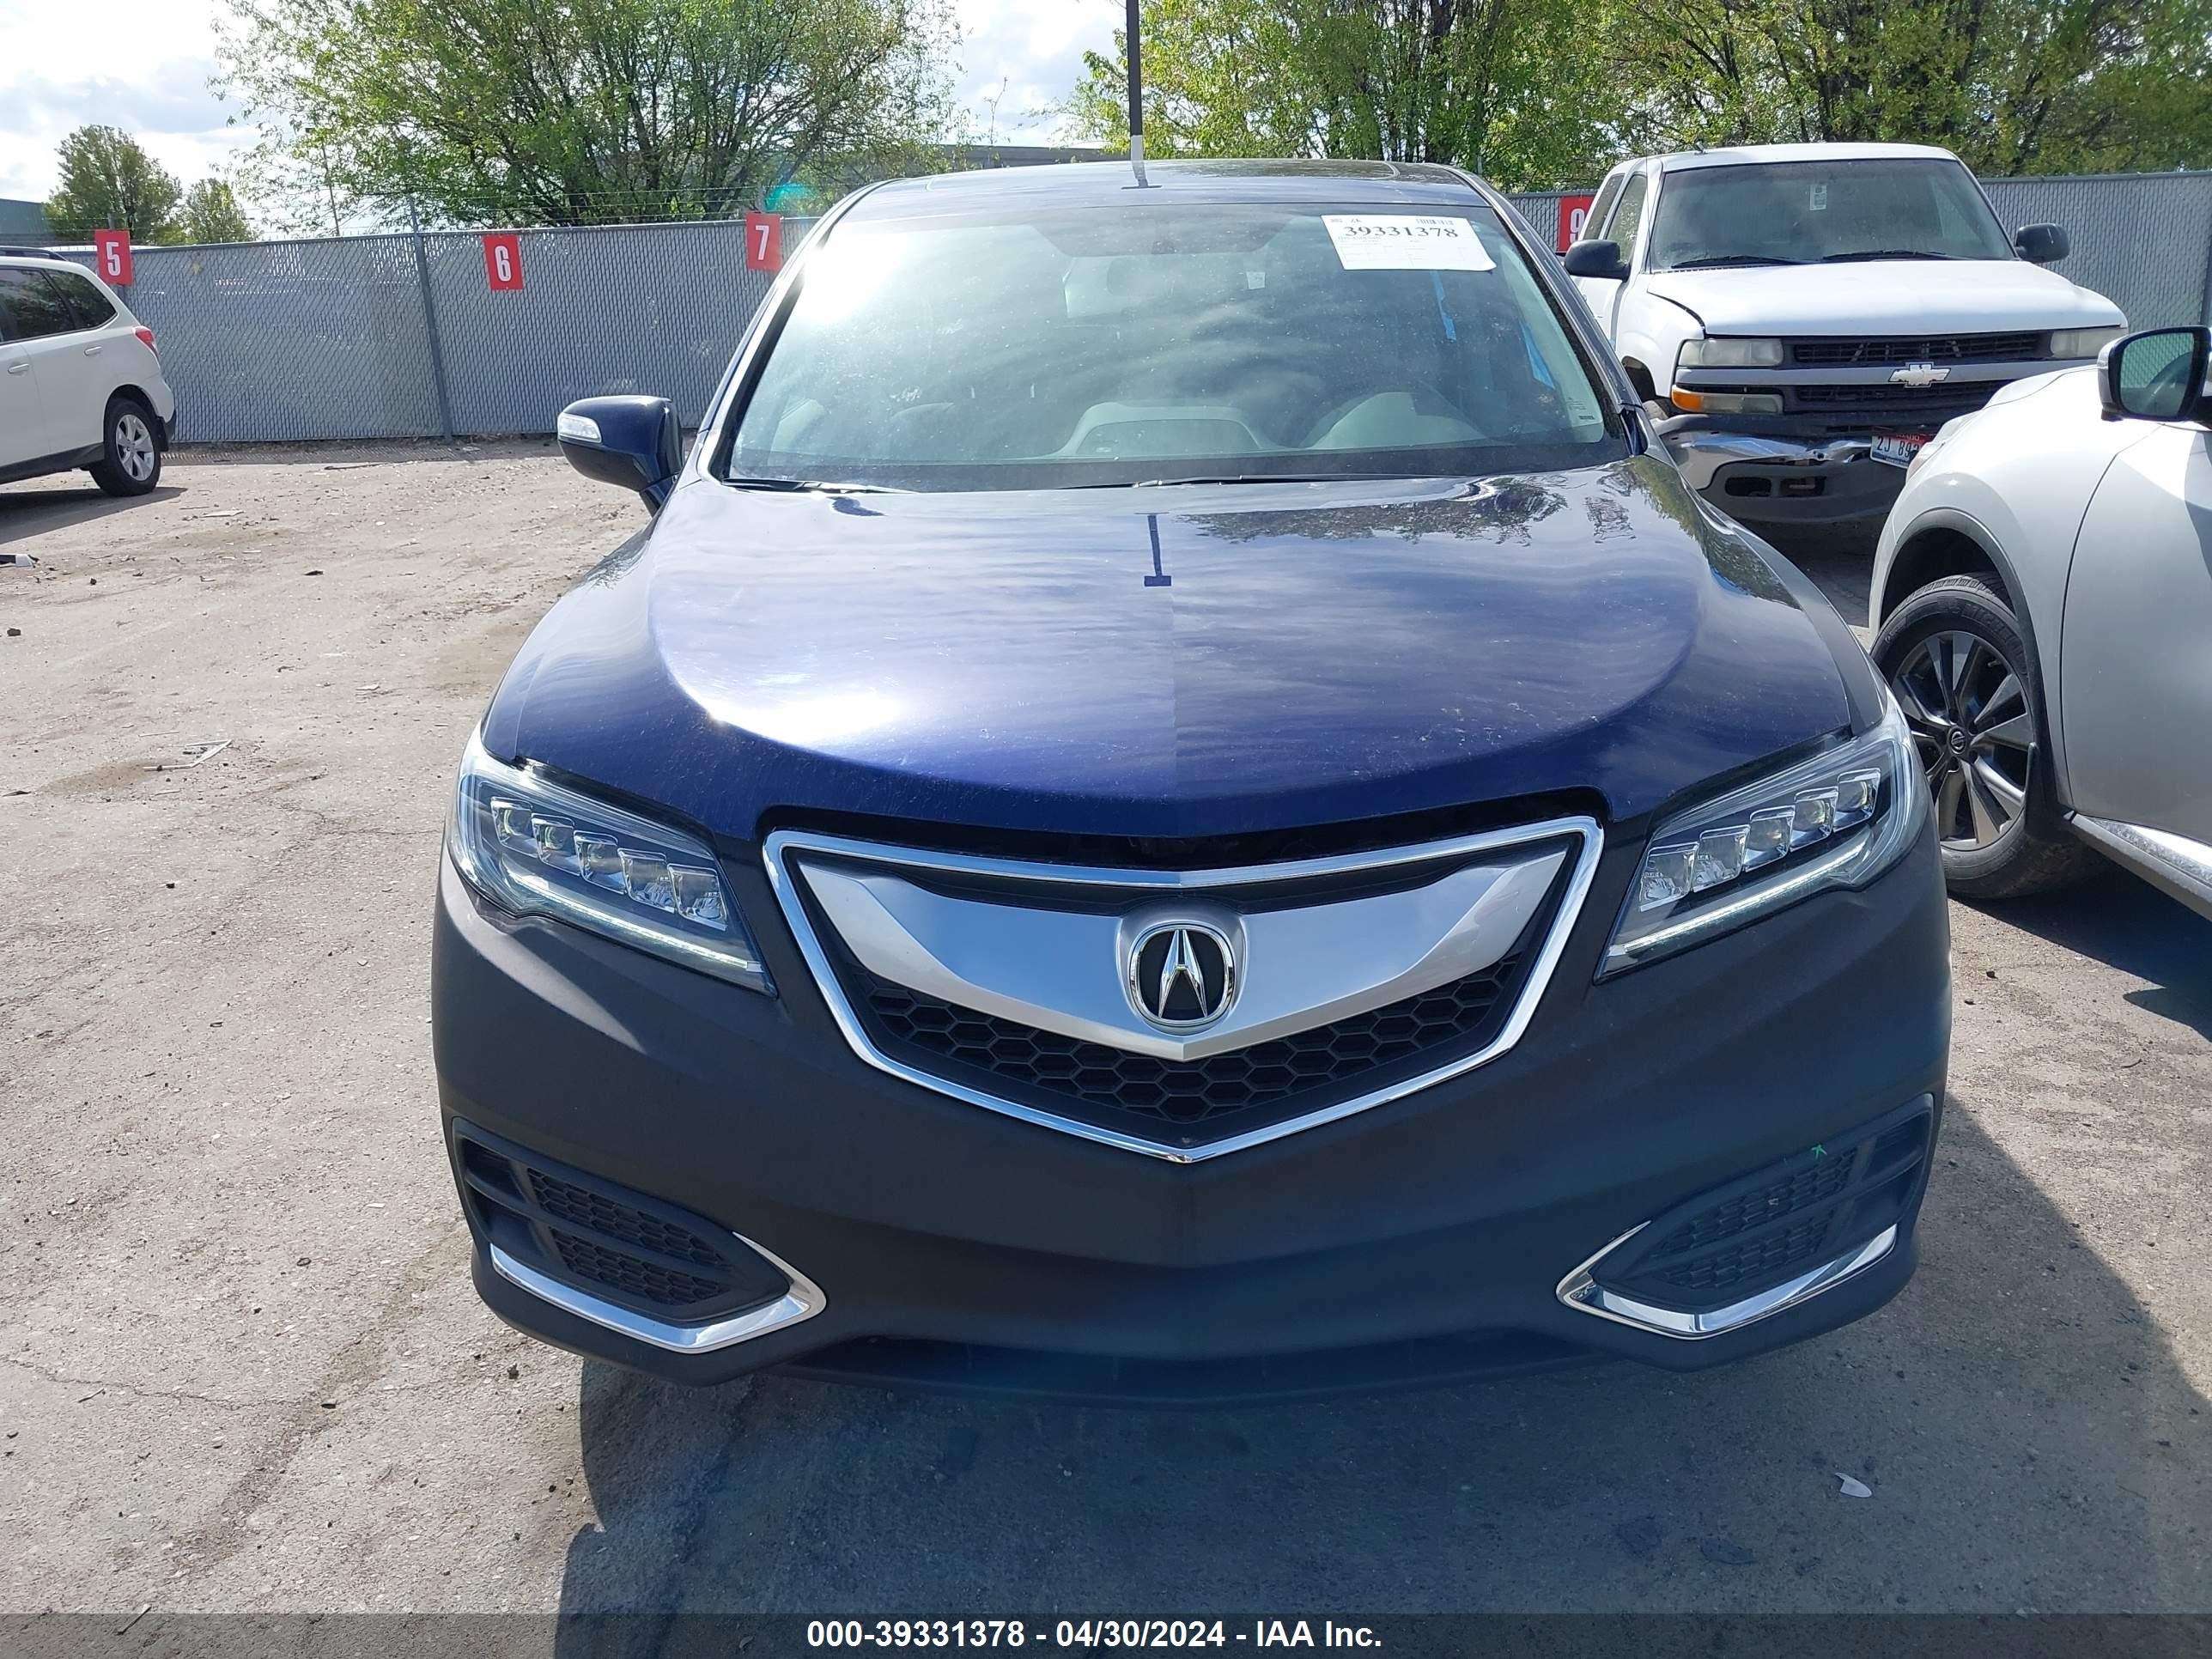 2017 Acura Rdx Technology Acurawatch Plus Packages/W/Technology Package vin: 5J8TB3H5XHL008854